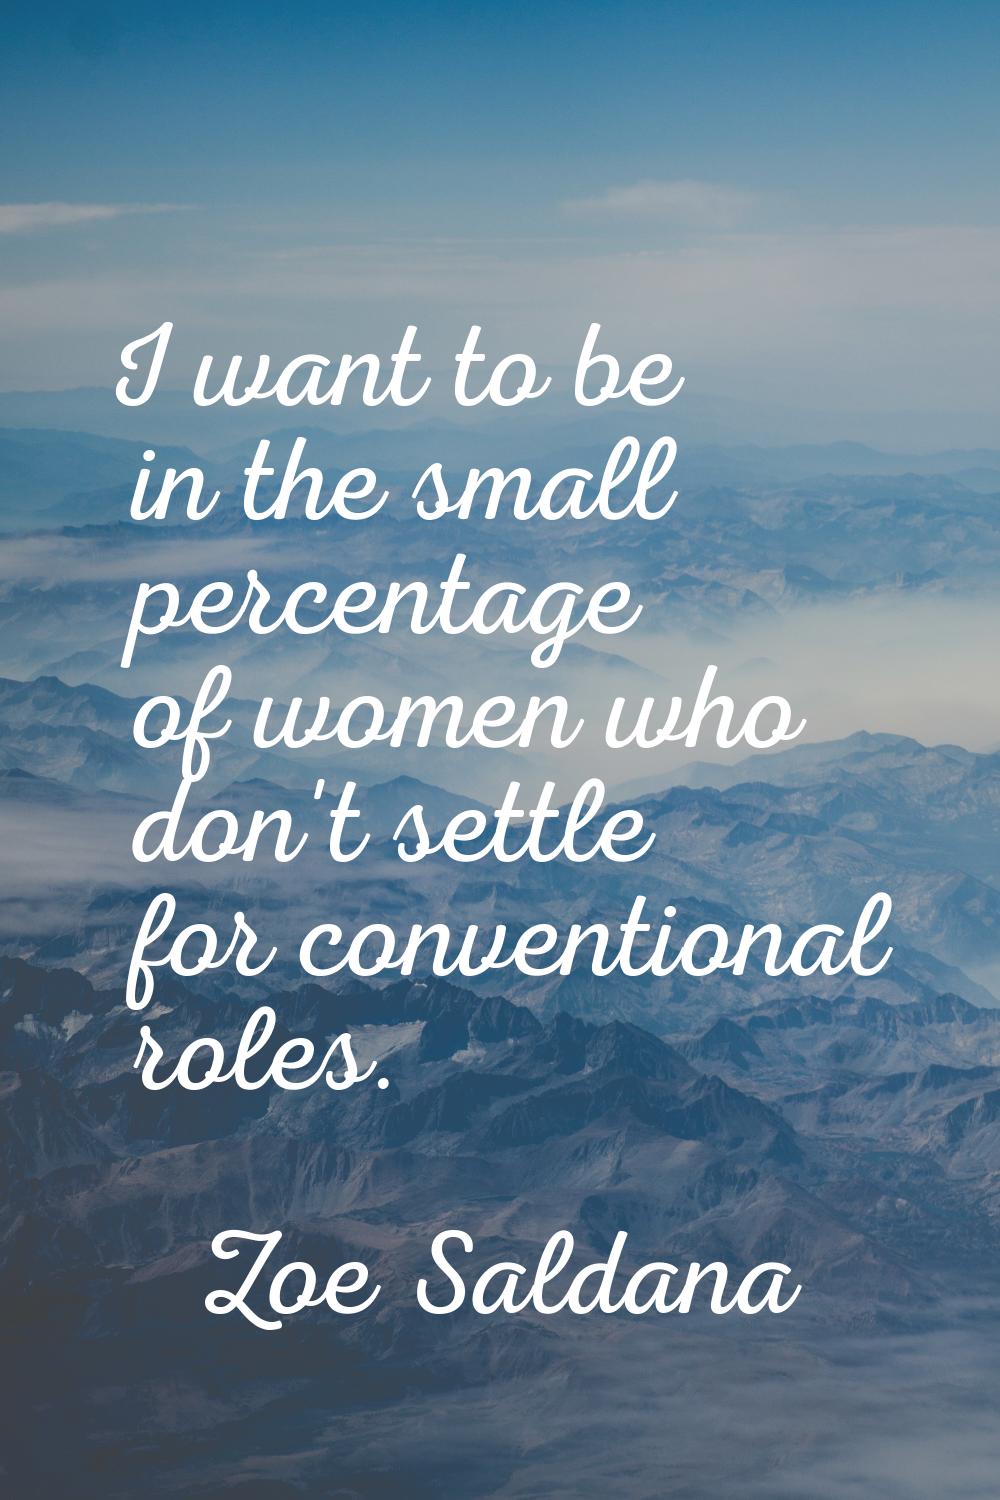 I want to be in the small percentage of women who don't settle for conventional roles.